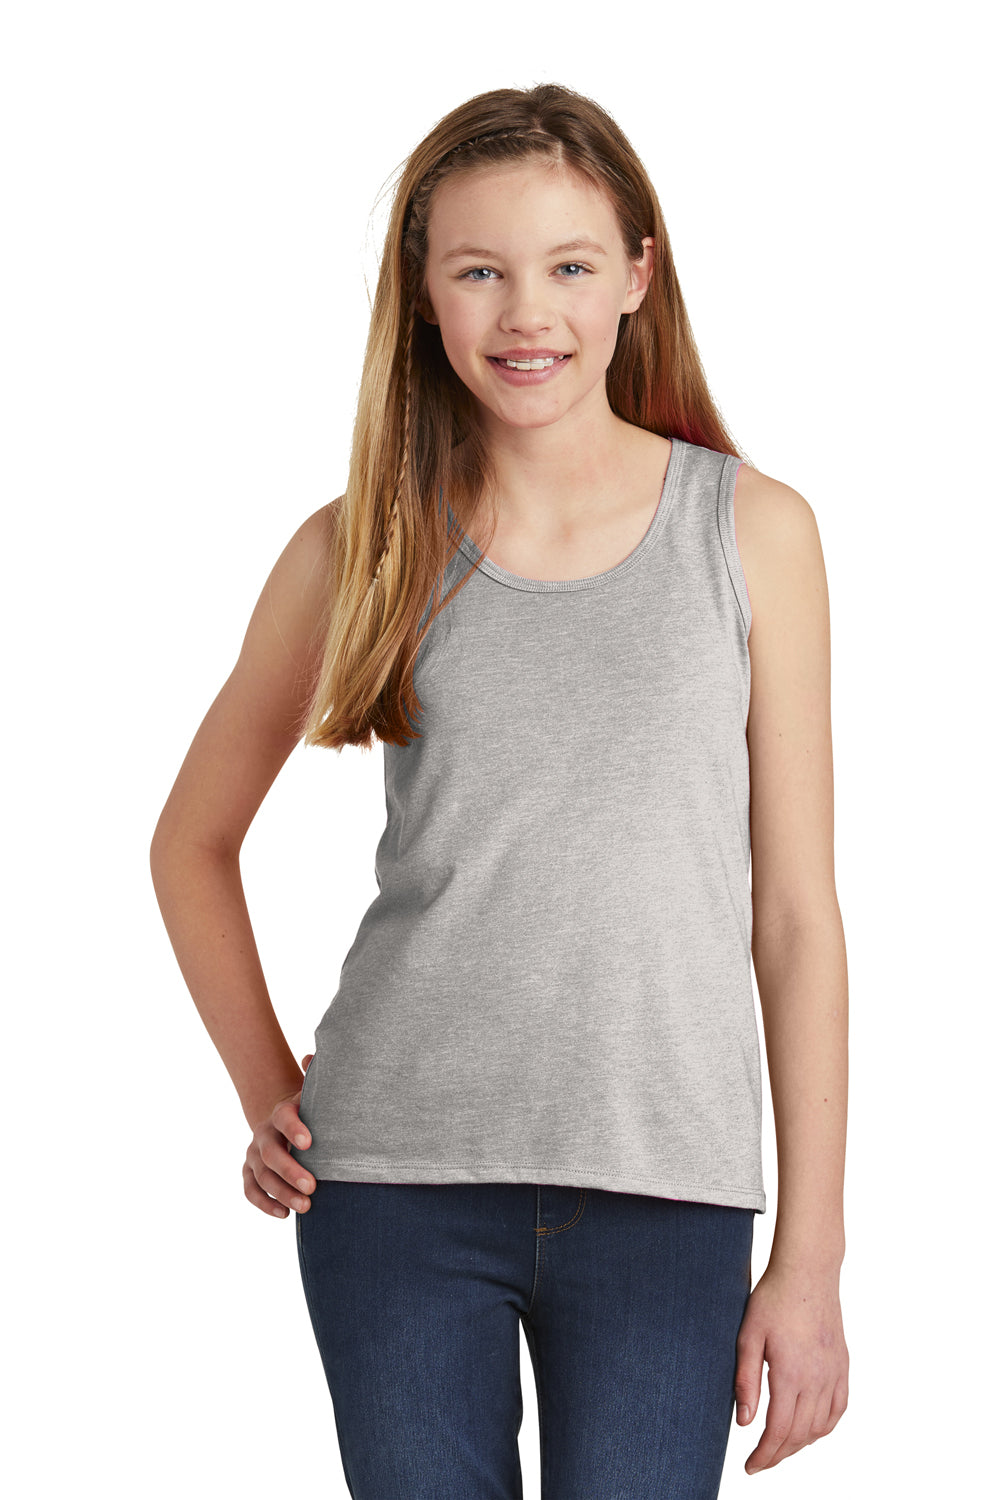 District DT6303YG Youth Very Important Tank Top Light Grey Front